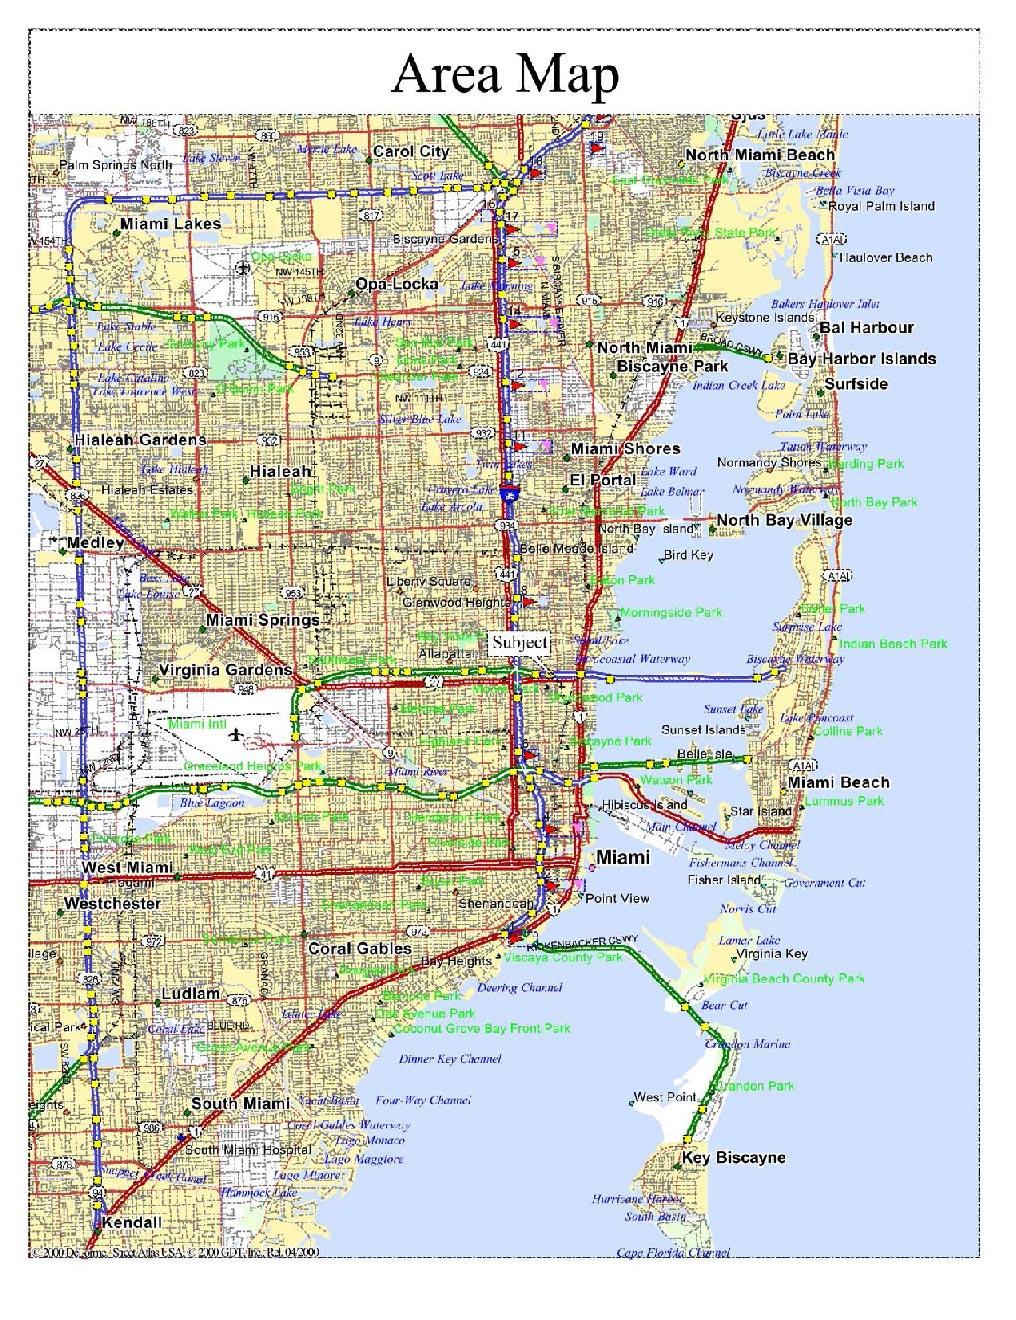 MIAMI-DADE COUNTY AREA ANALYSIS The subject is located in Miami-Dade County, Florida.